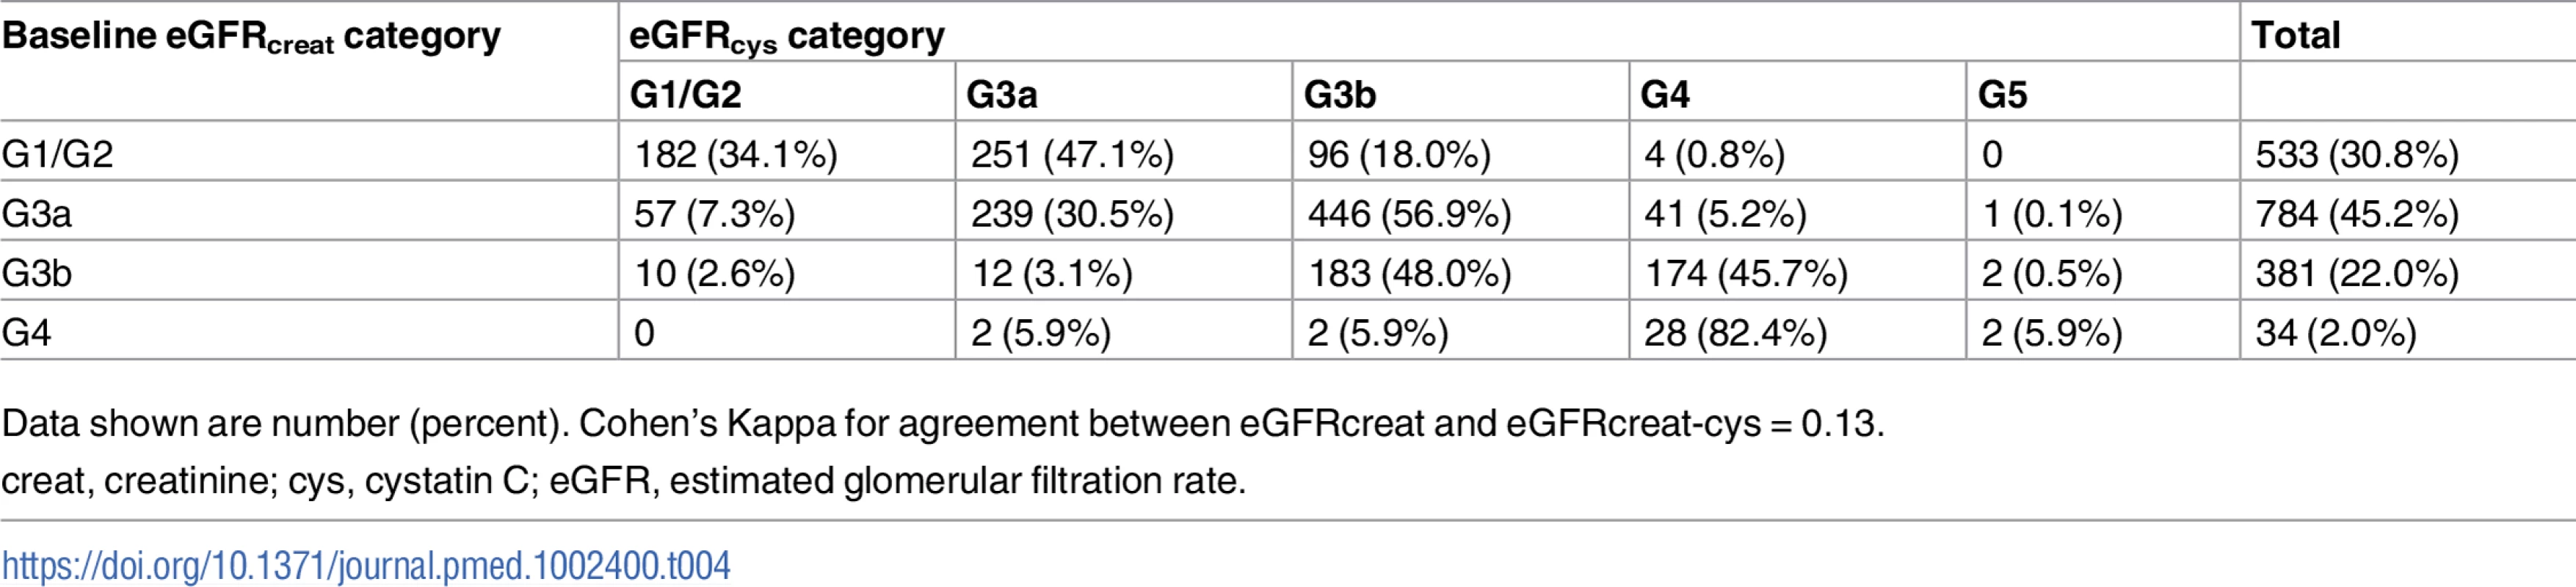 Baseline eGFRcreat category and reclassification using eGFRcys in all study participants.